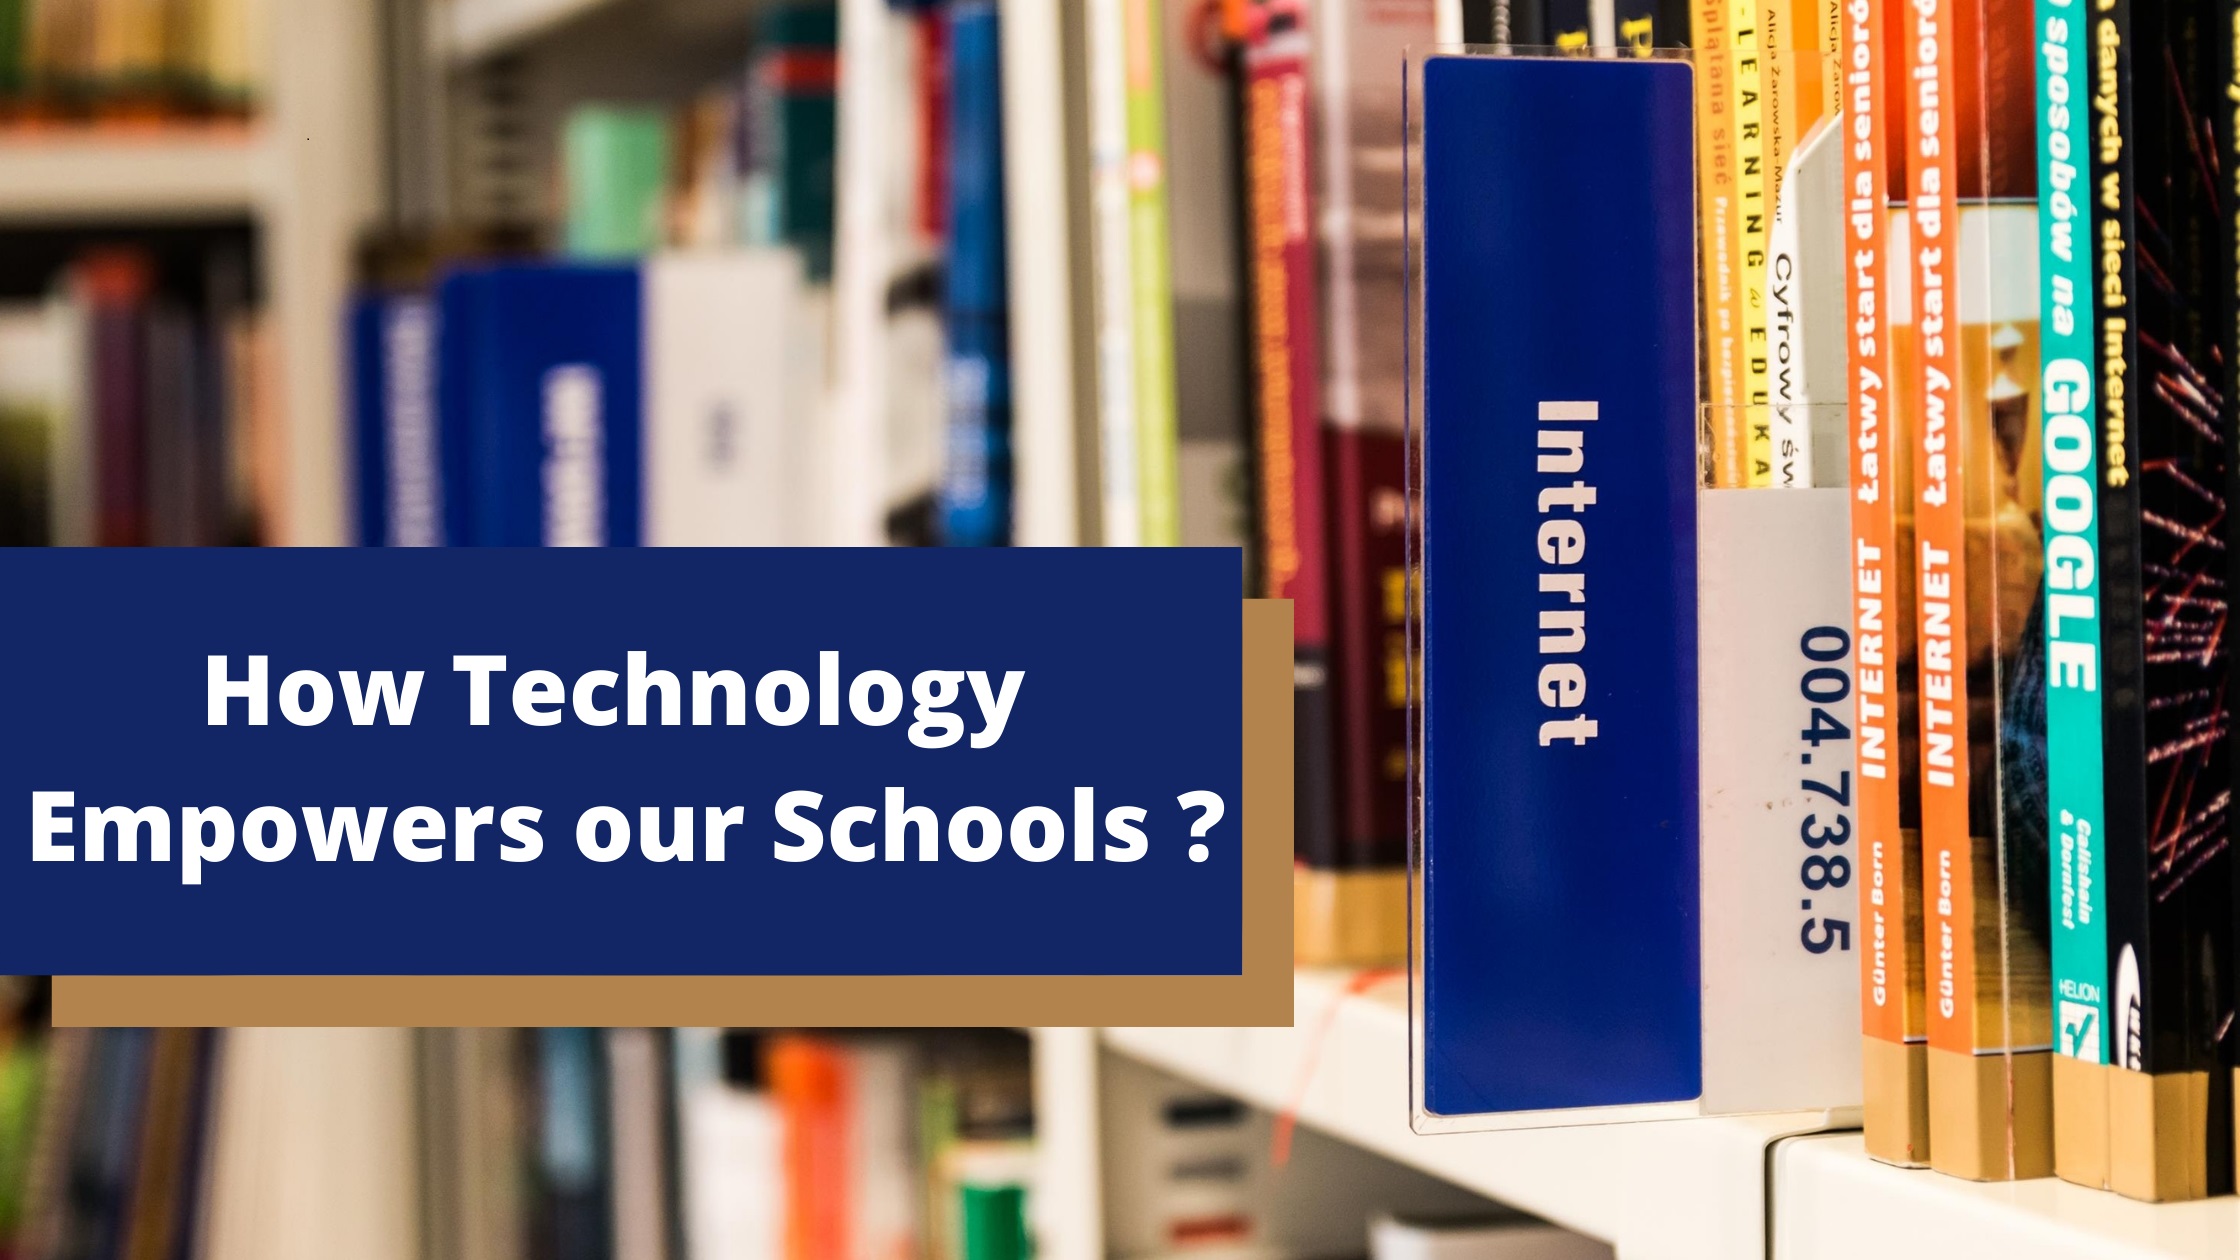 How Technology Empowers our Schools-1604836279.jpg?0.8170859303405782